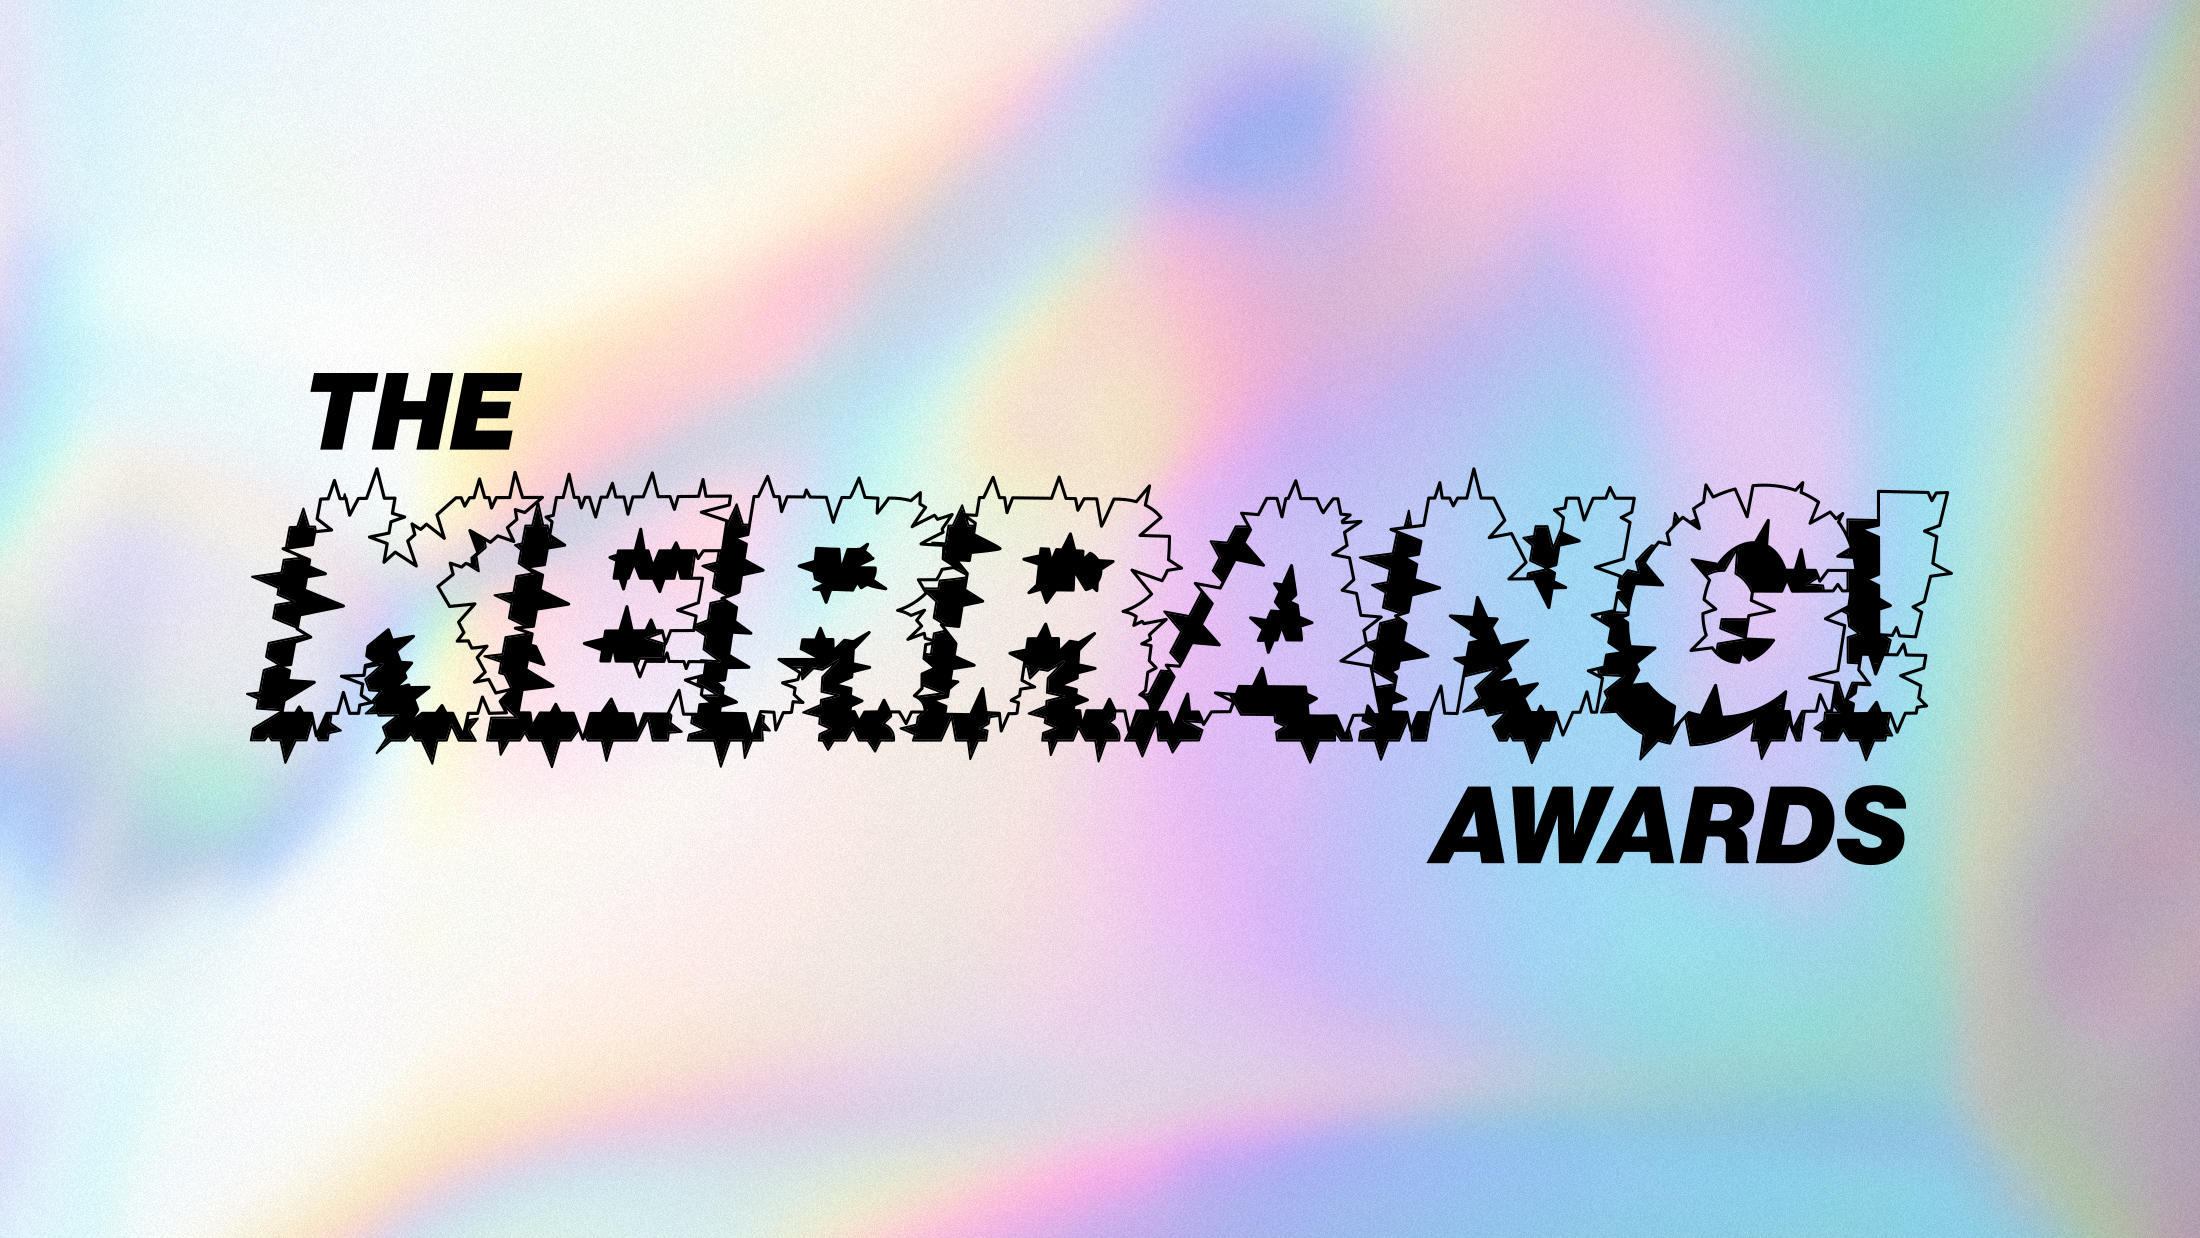 KERRANG! AWARDS ARE BACK – BIFFY CLYRO AND HALSEY LEAD NOMINATIONS